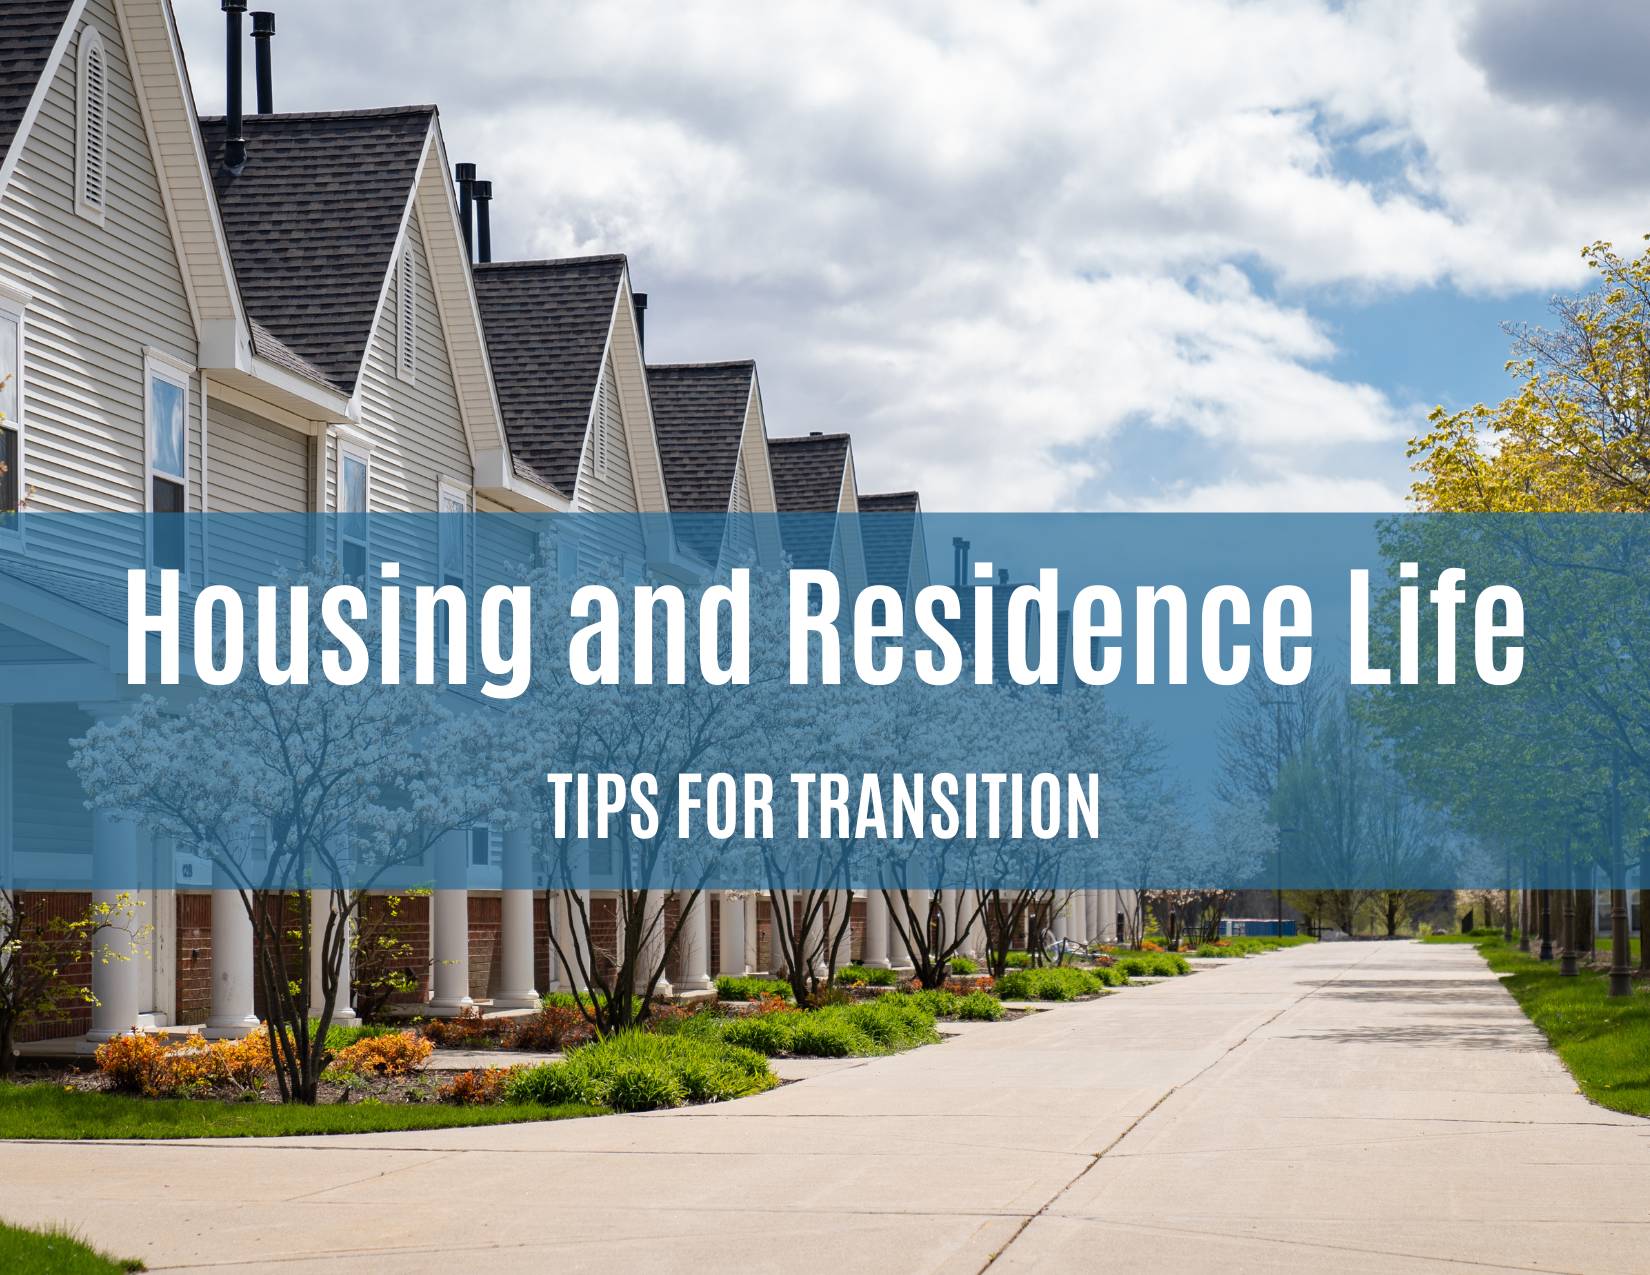 Housing and residence life, tips for transition